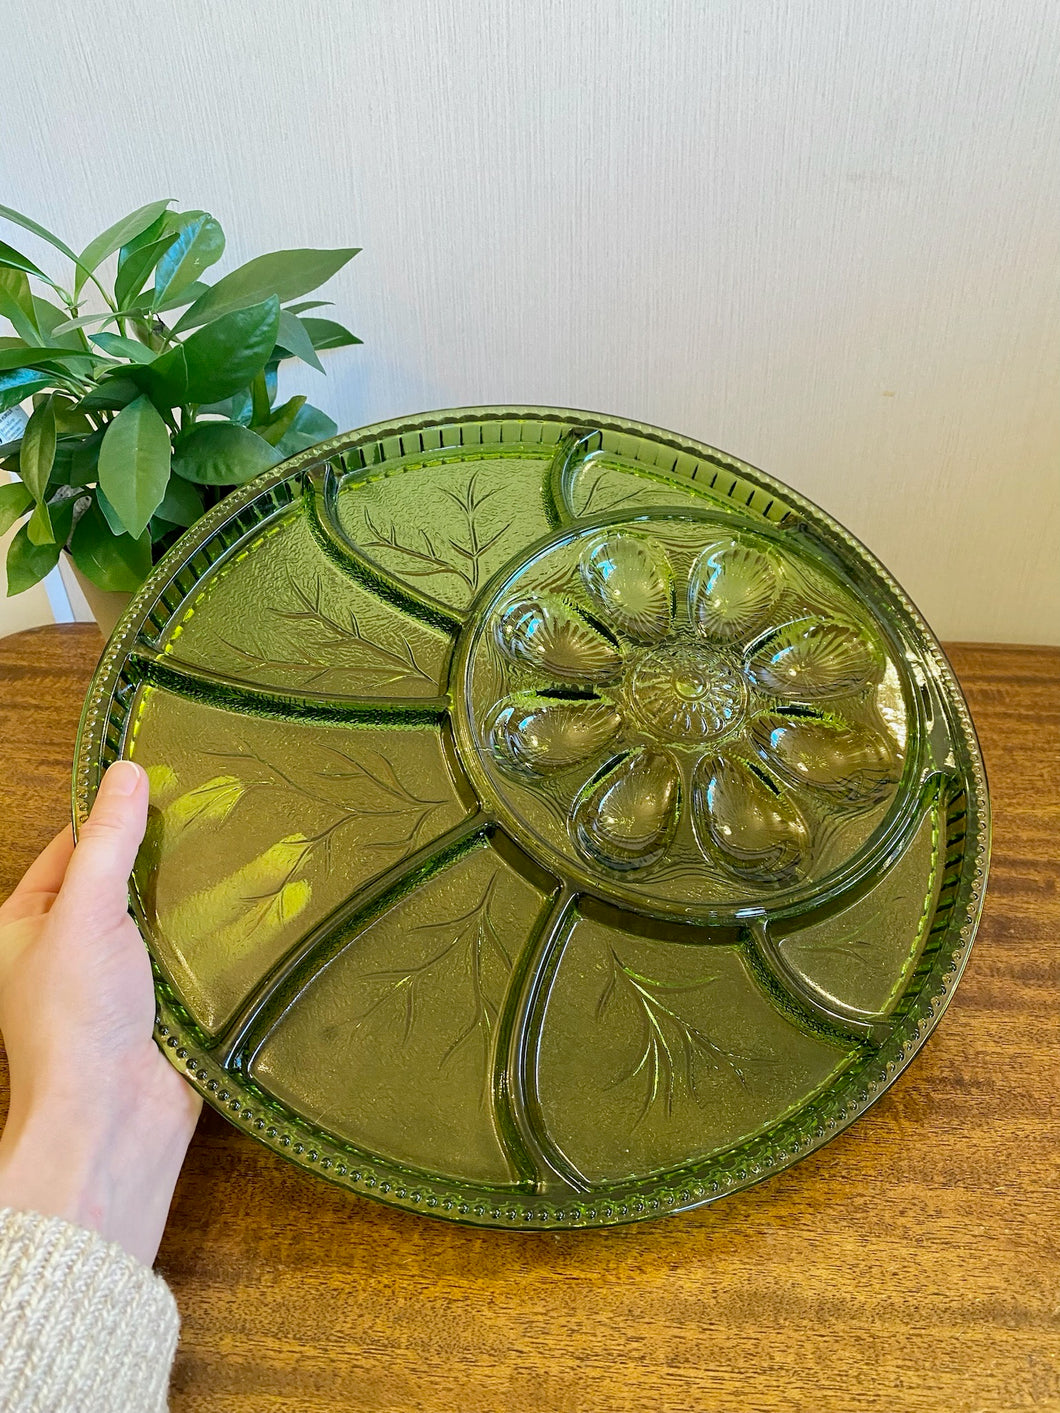 Gorgeous Vintage Green Hors D'Oeuvres Serving Dish